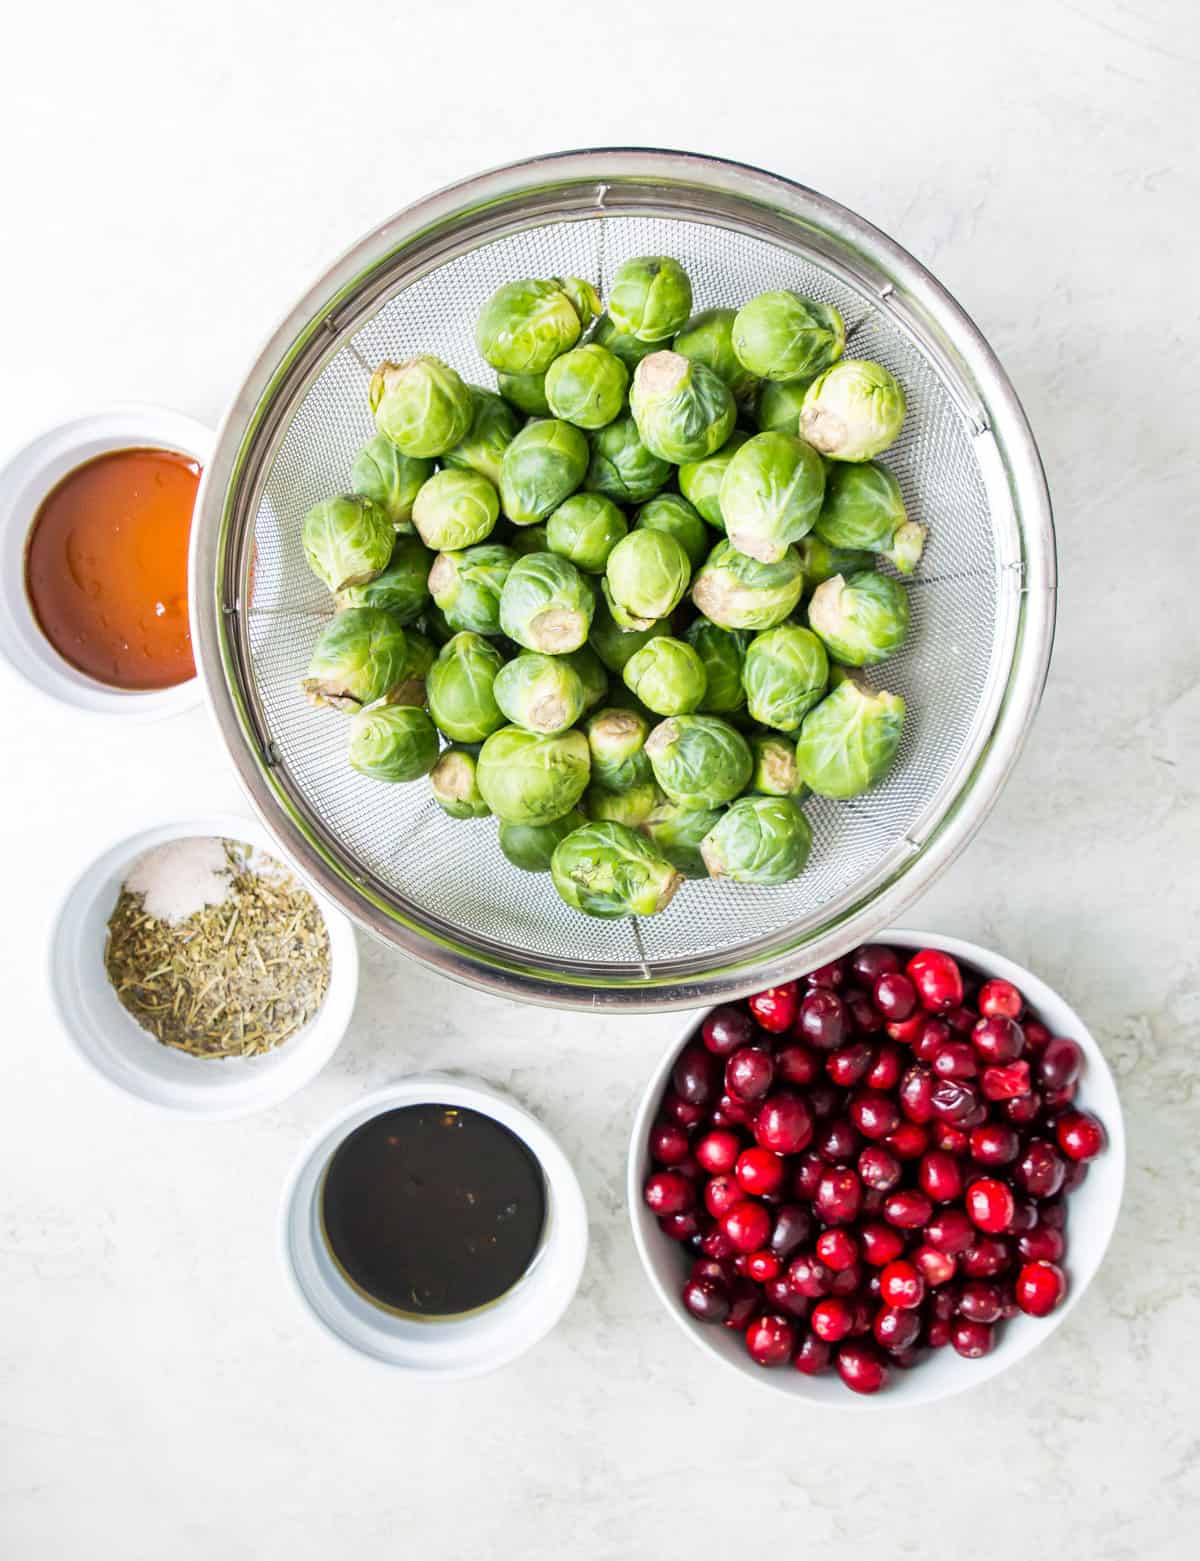 The ingredients needed for making roasted Brussels sprouts with cranberries separated into small bowls.